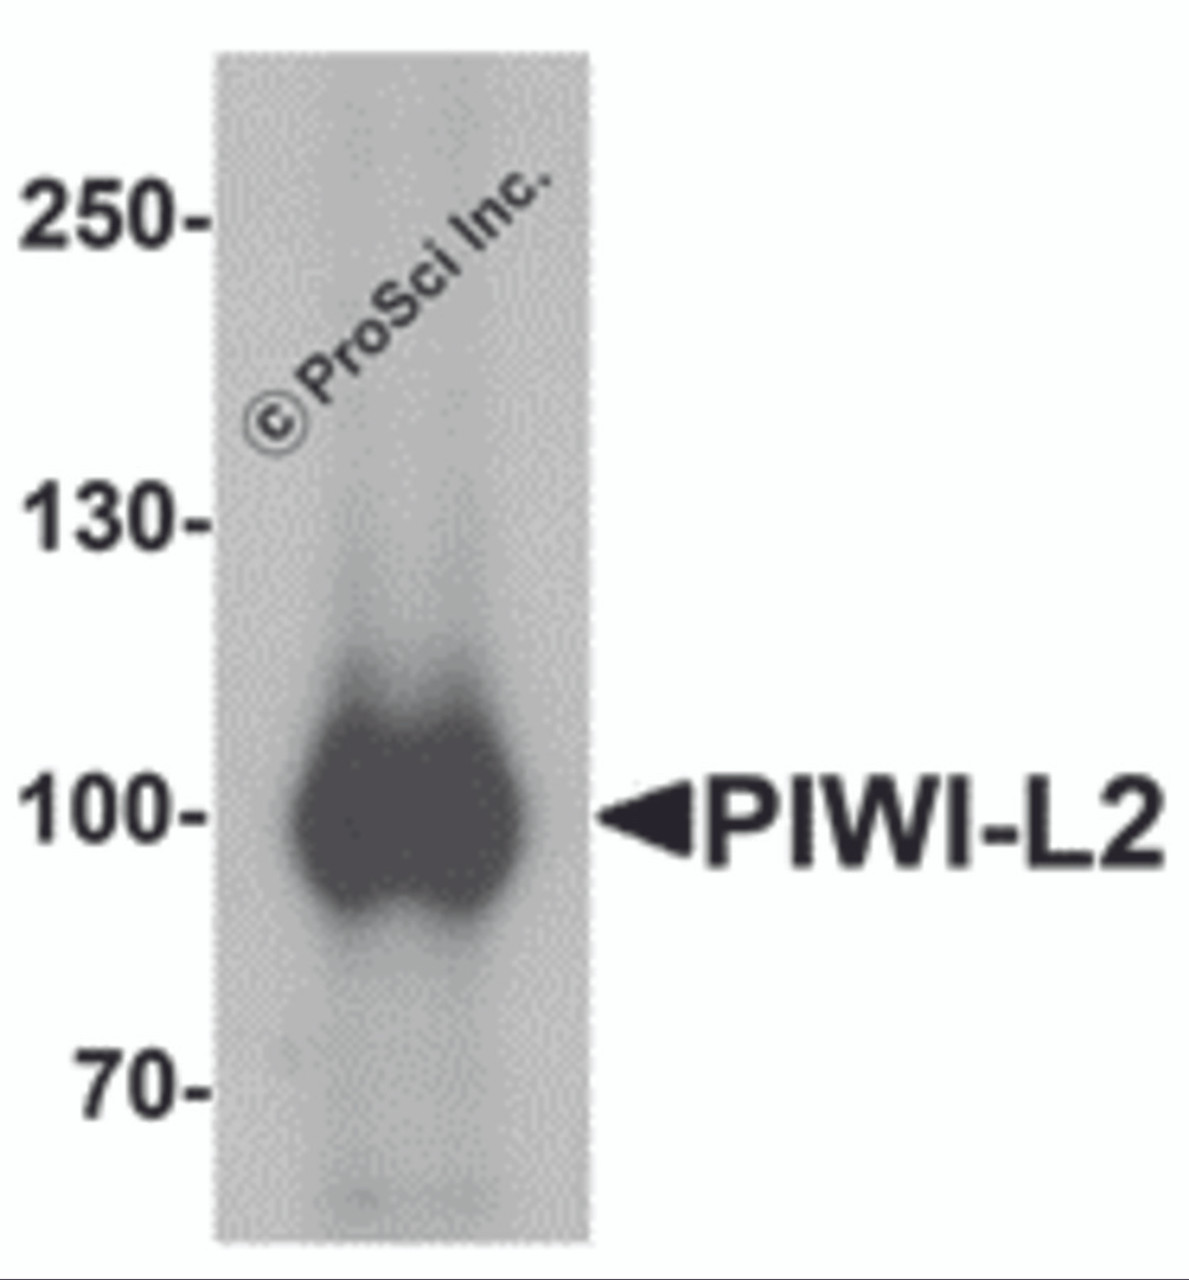 Western blot analysis of PIWI-L2 in HepG2 cell lysate with PIWI-L1 antibody at 1 &#956;g/mL.